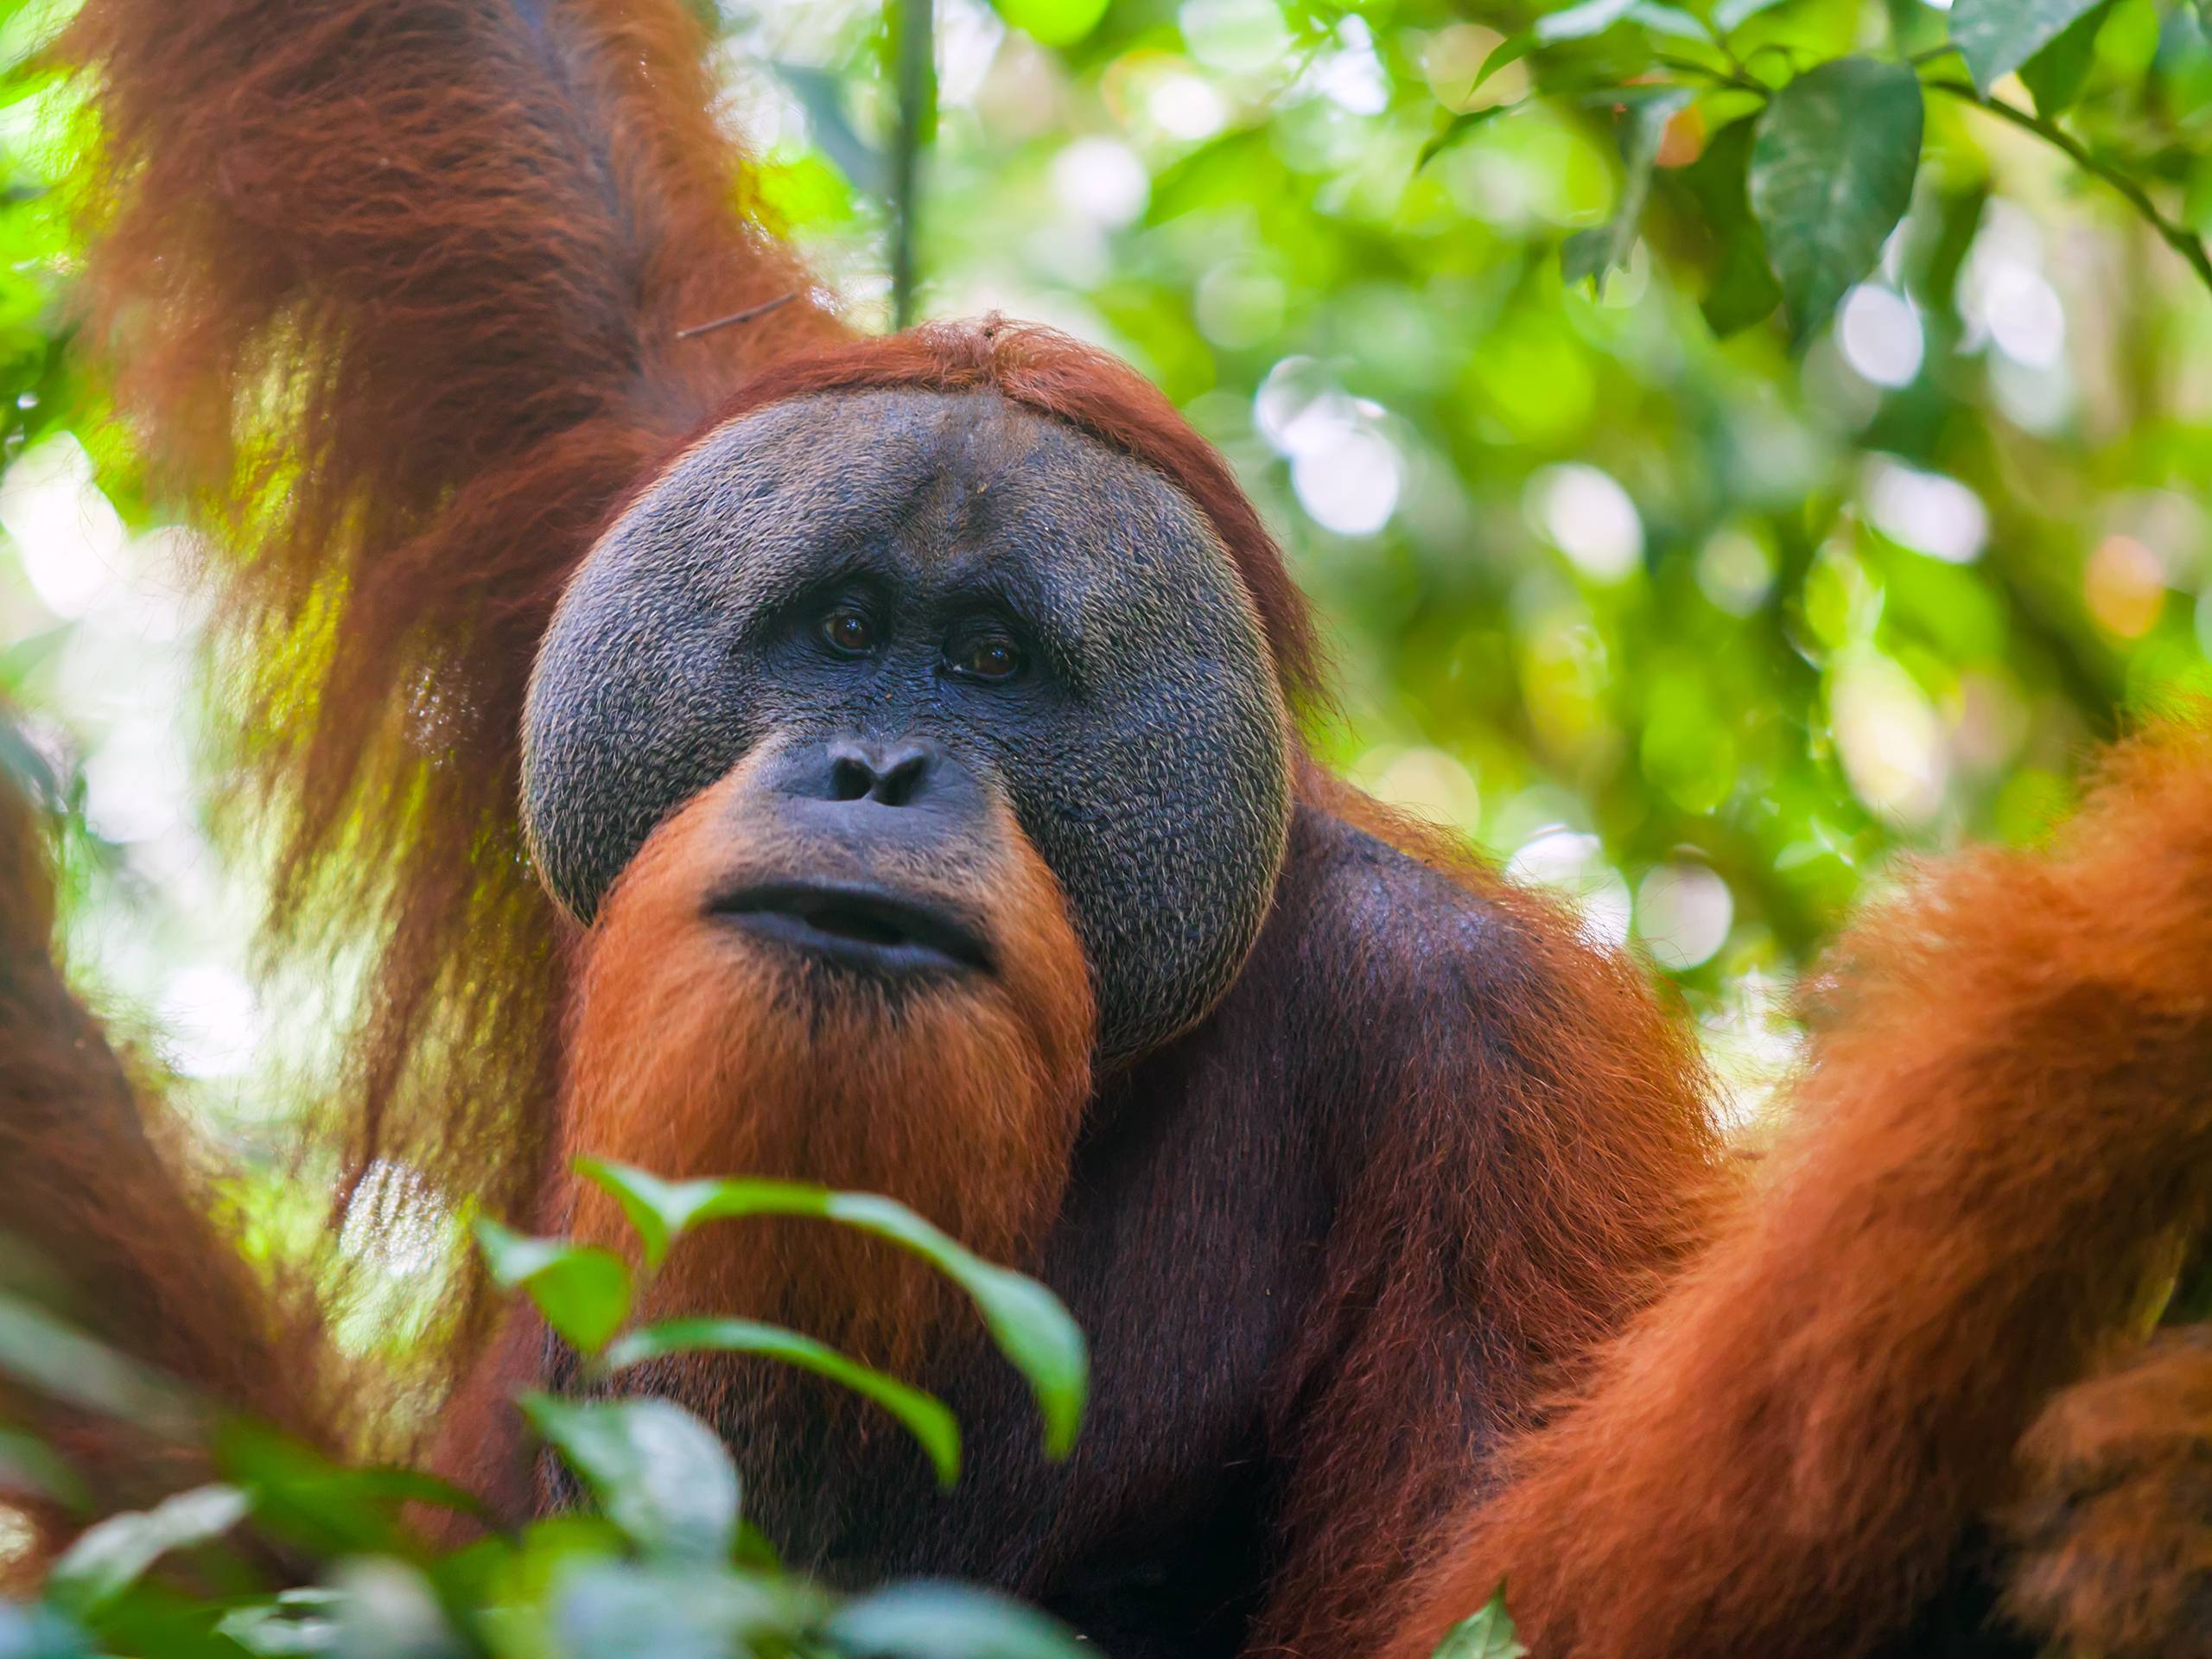 The Top 10 Orangutan Facts You Need to Know